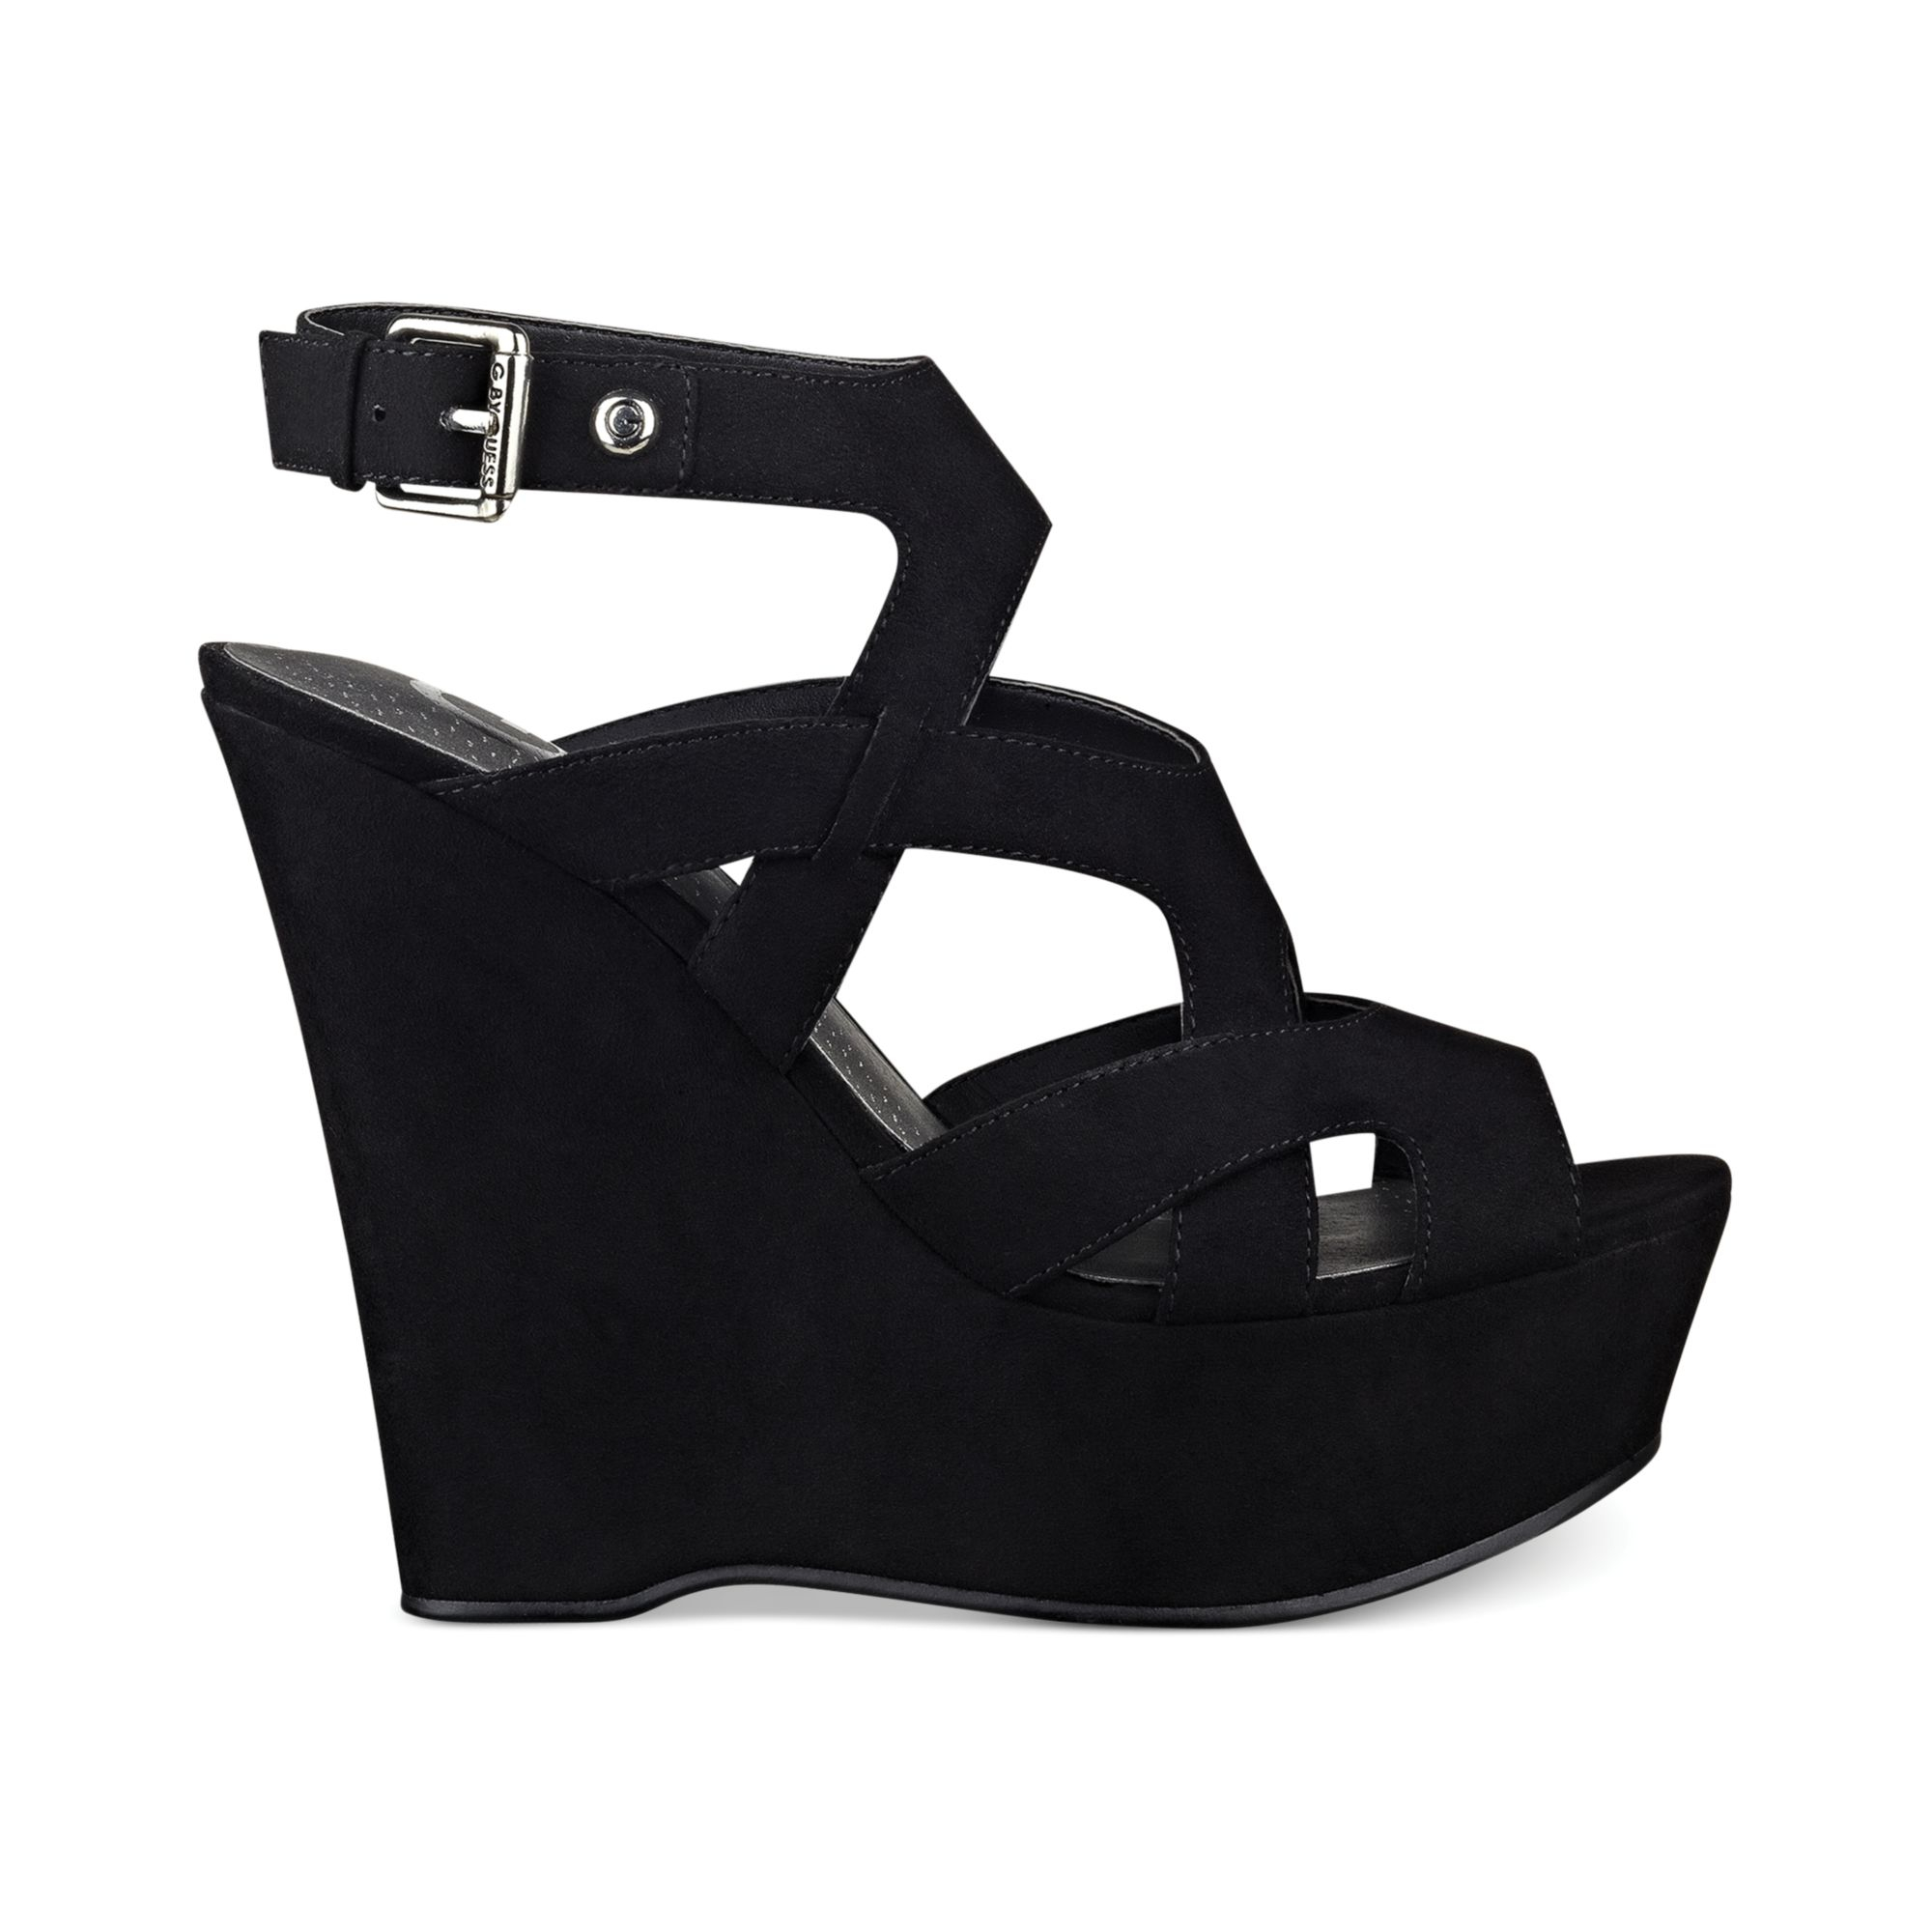 Lyst - G by Guess Womens Shoes Hizza Platform Wedge Sandals in Black